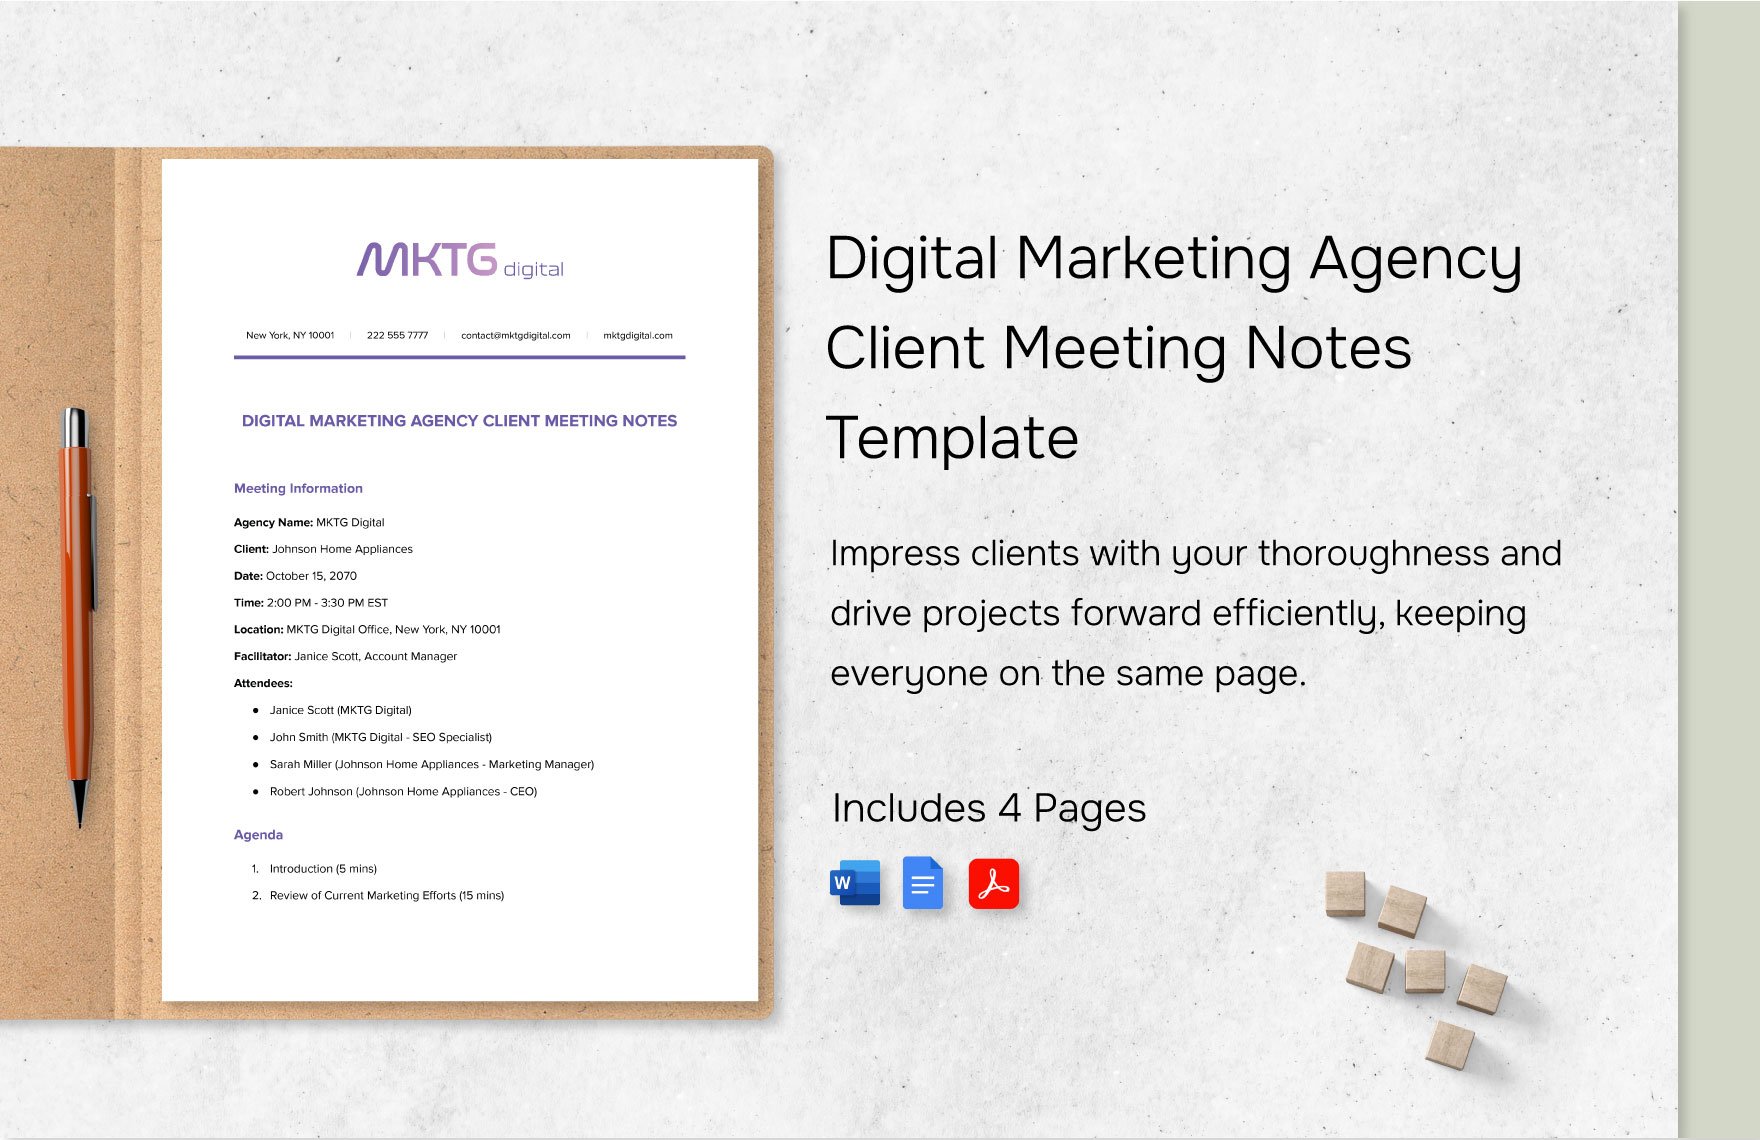 Digital Marketing Agency Client Meeting Notes Template